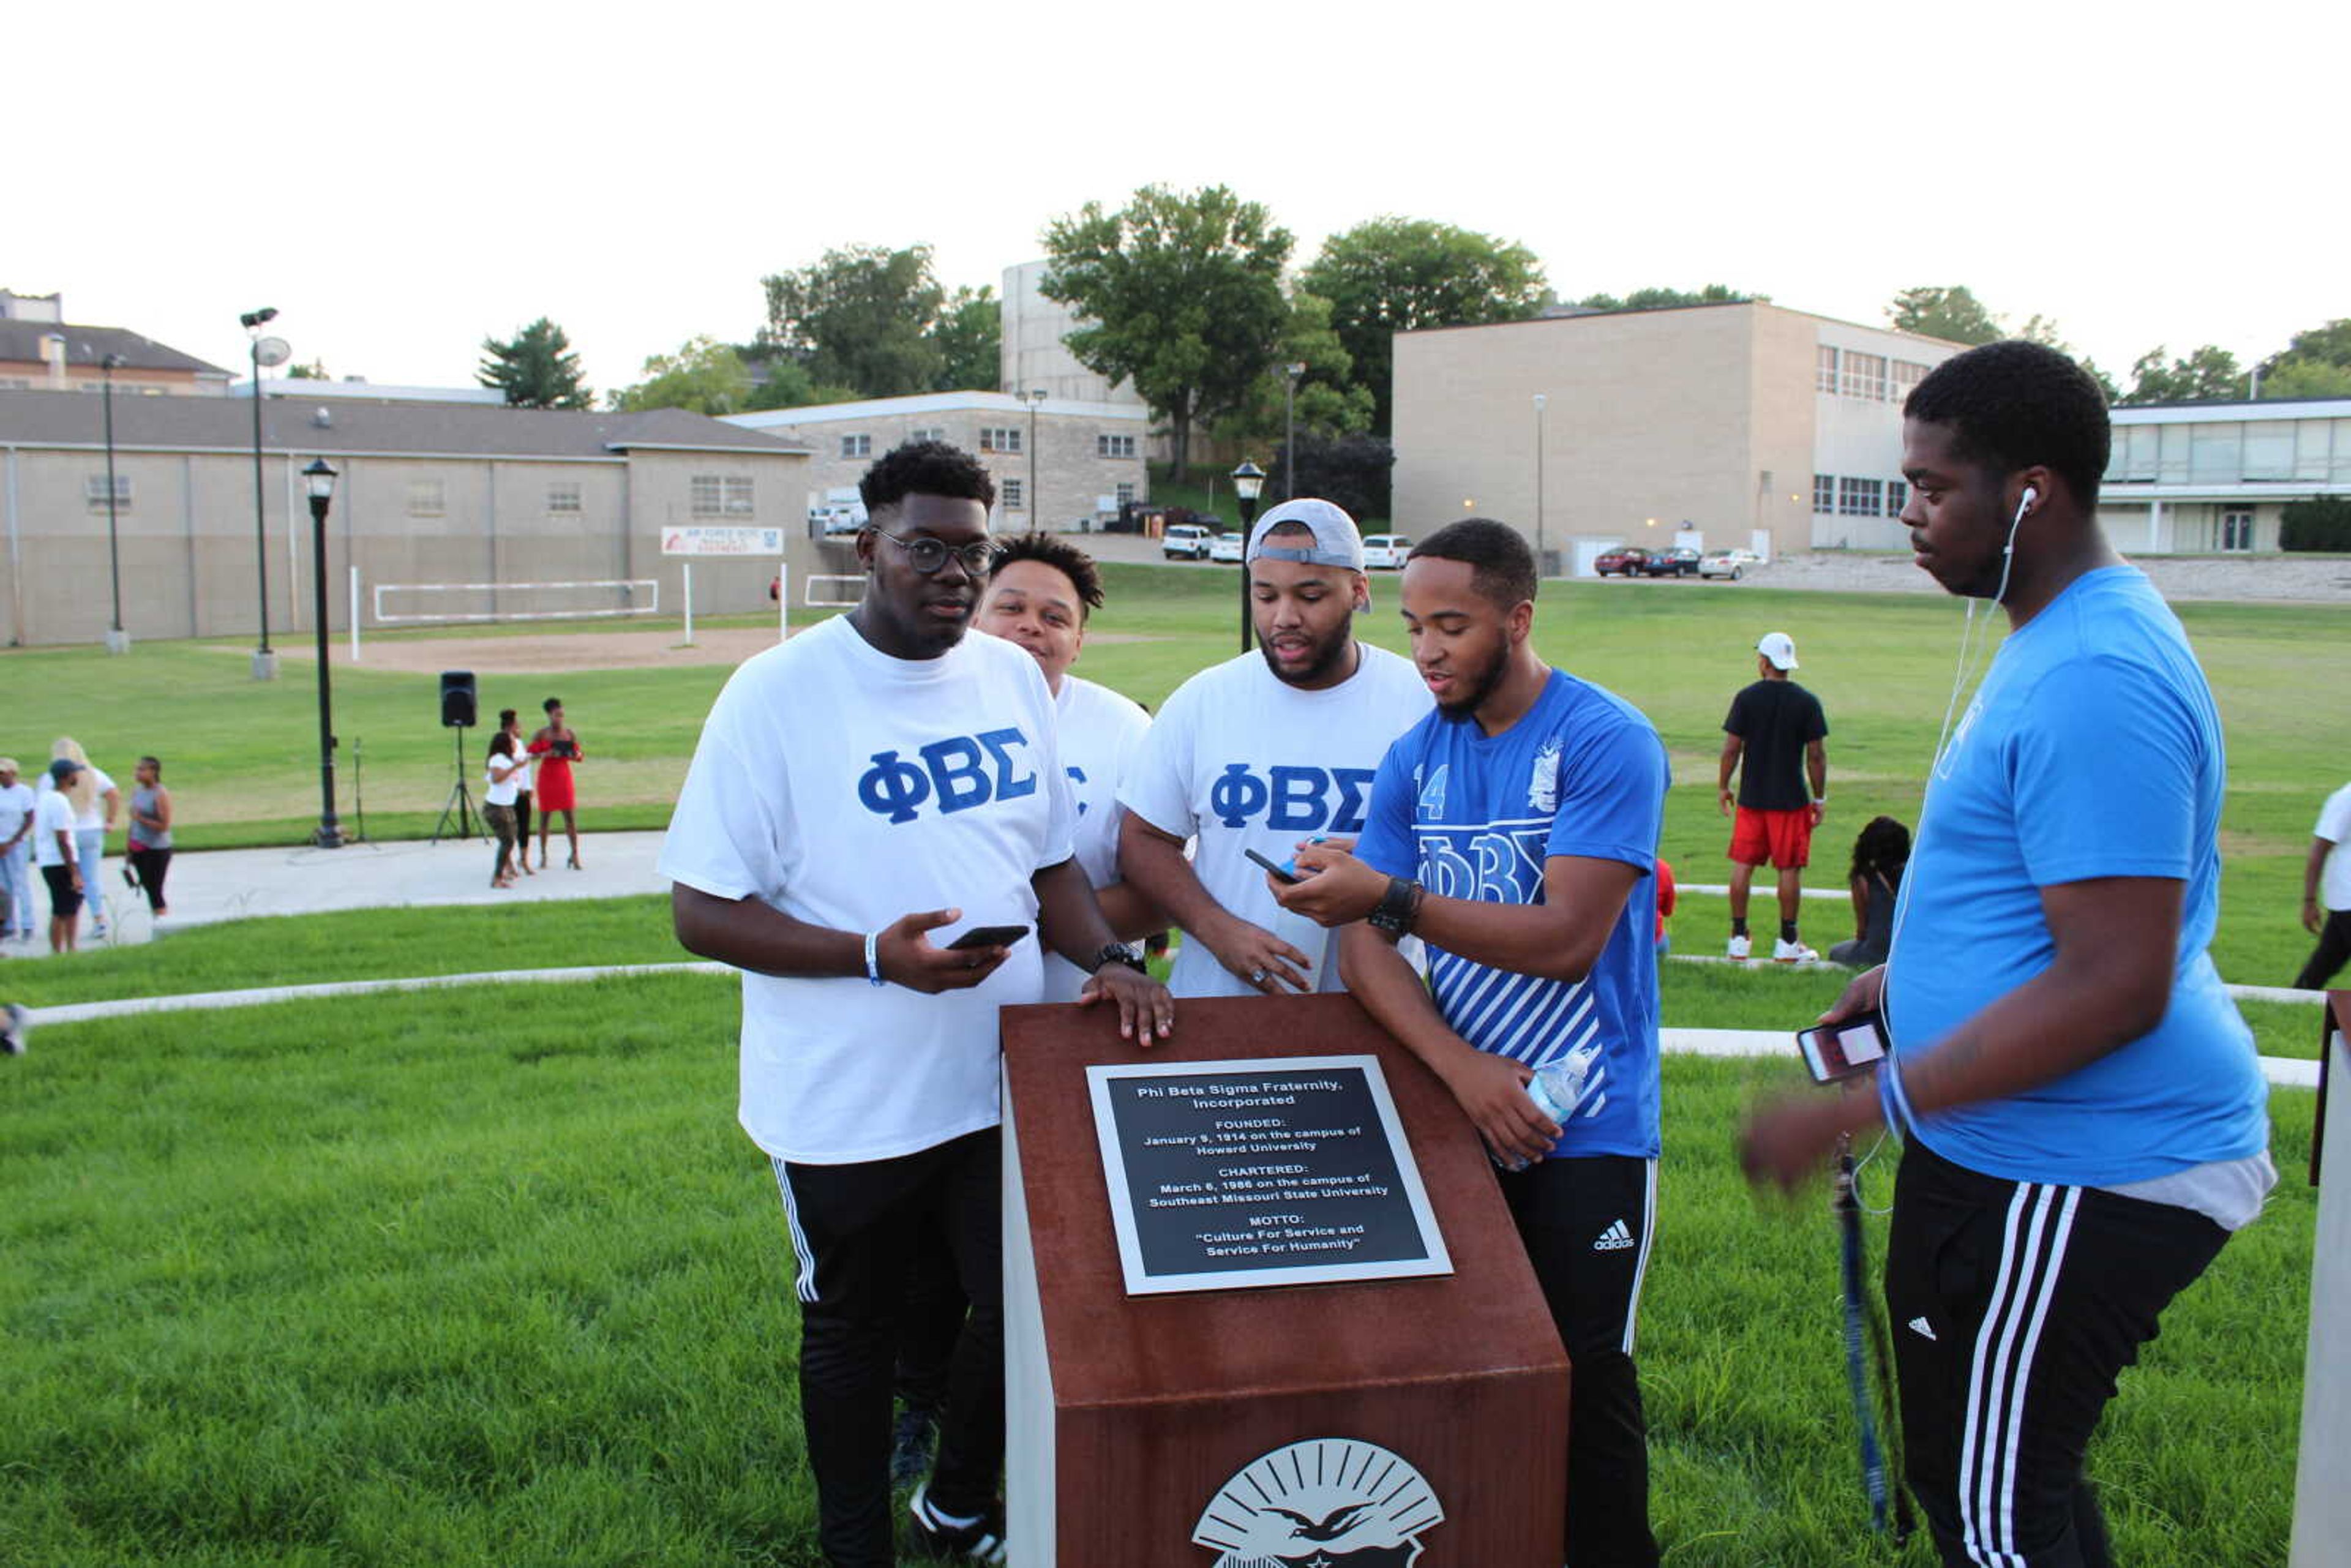 Members of Phi Beta Sigma Fraternity admire the plaque recognizing their organization following the opening ceremony for the NPHC Plaza Aug. 16.